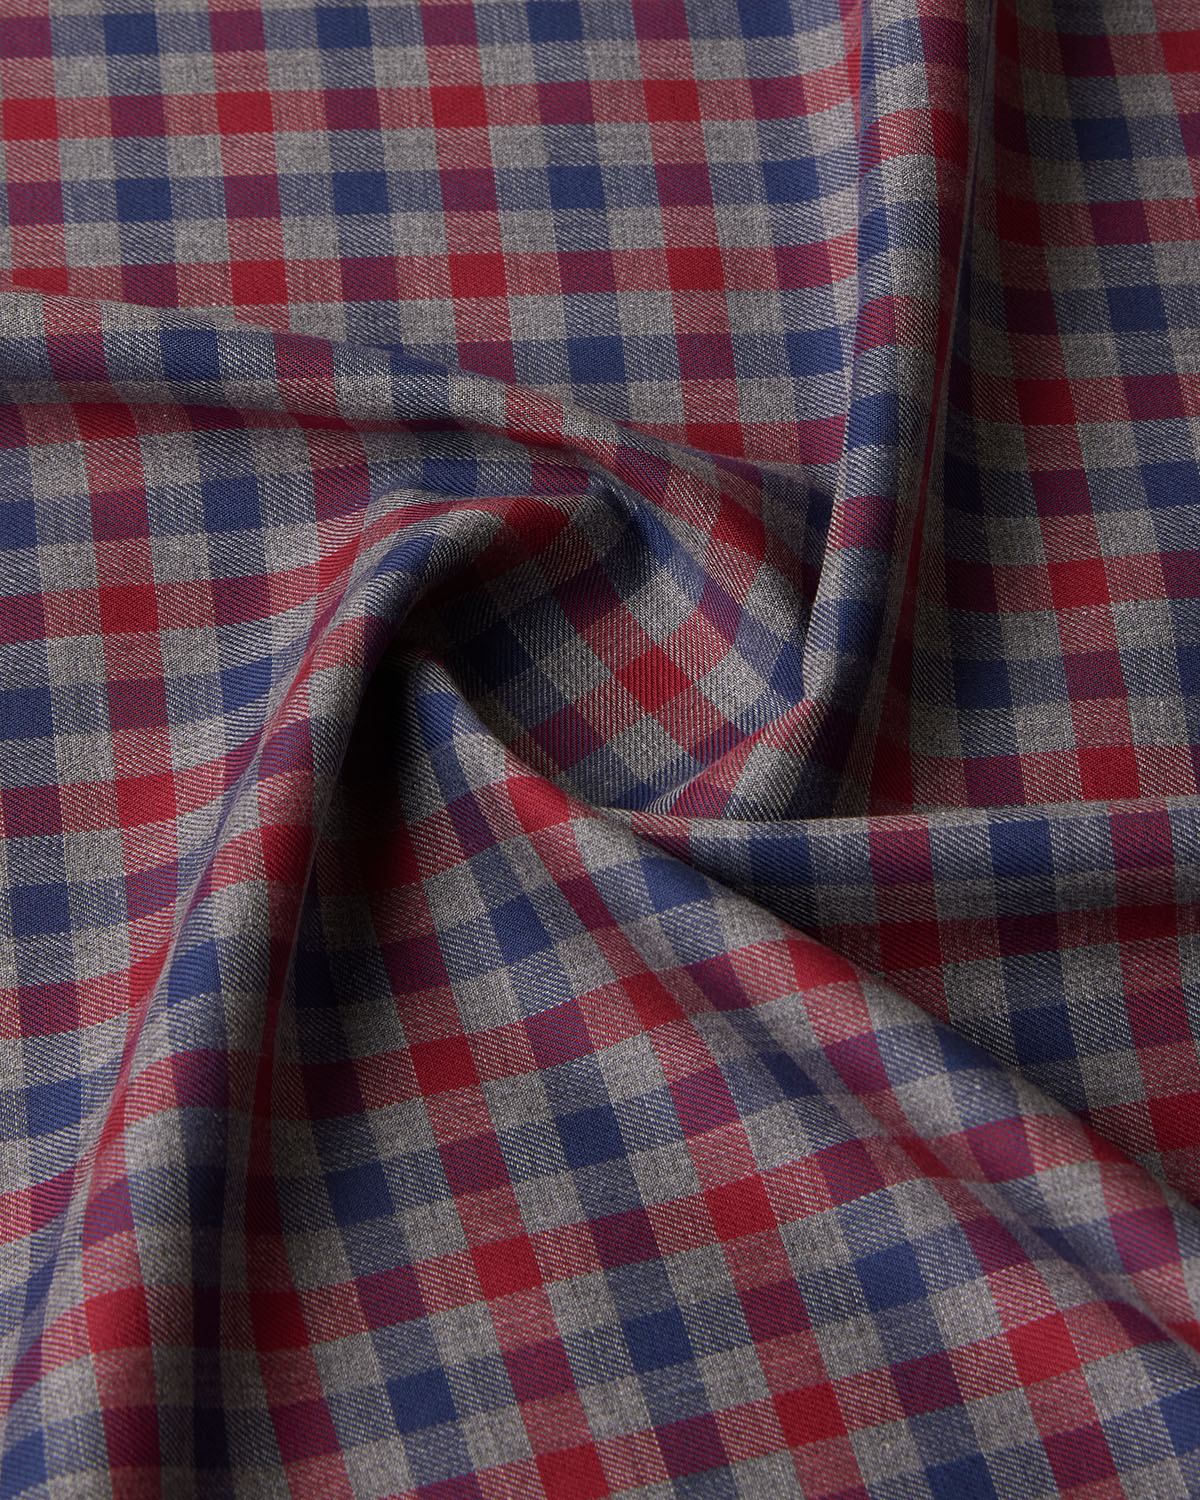 Somelos Burgundy Ink Checked Shirt